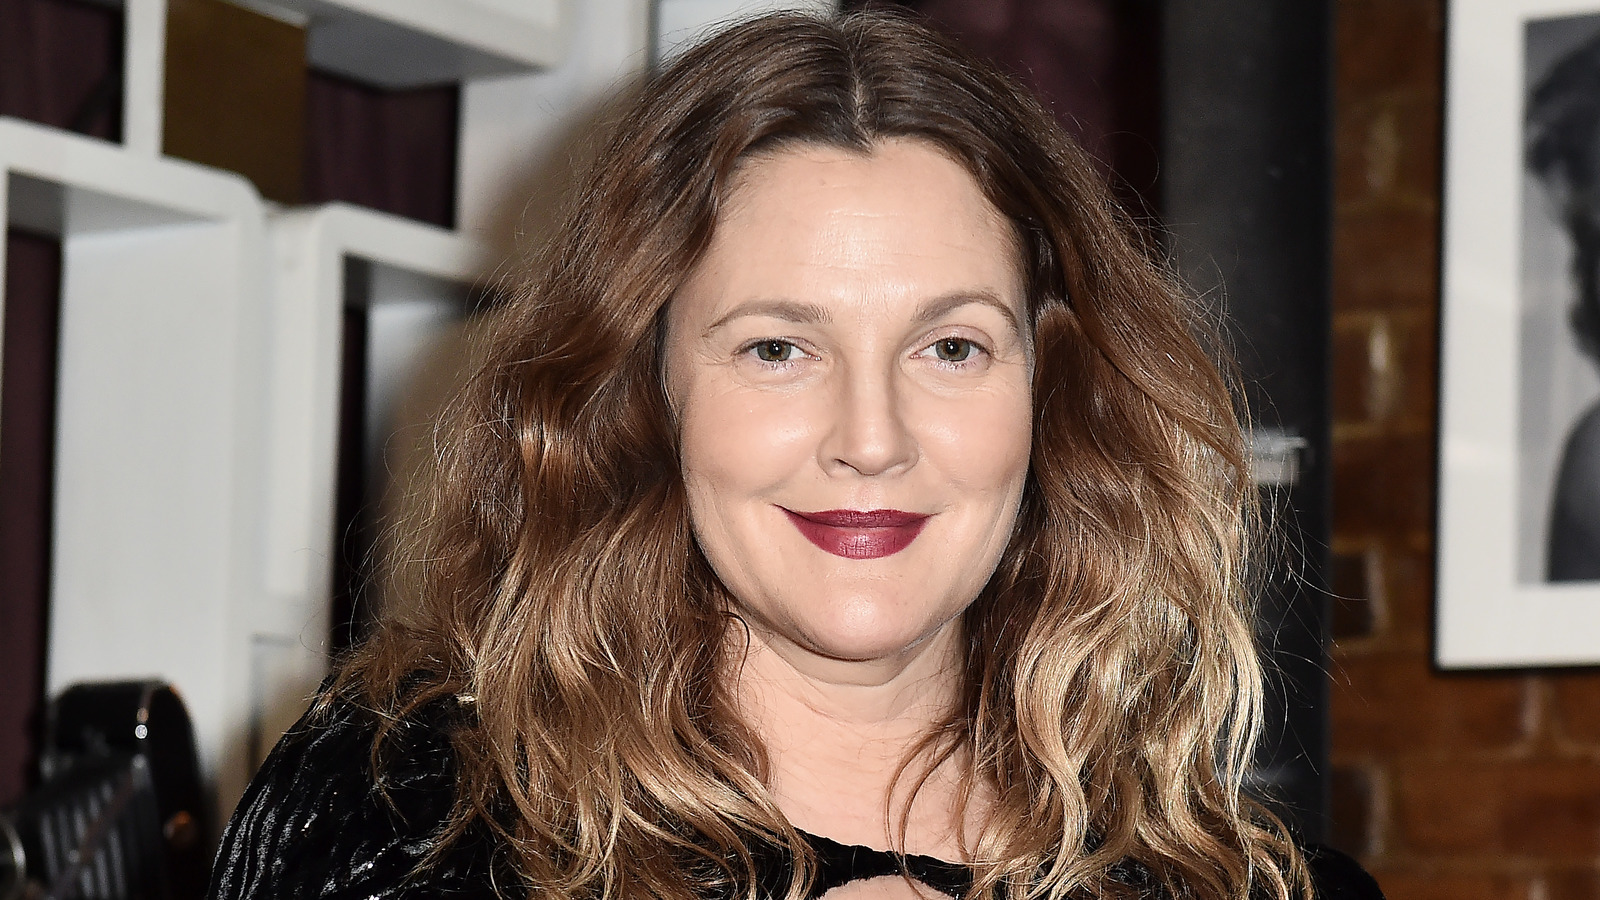 Why Drew Barrymore Got Stood Up According To An Expert